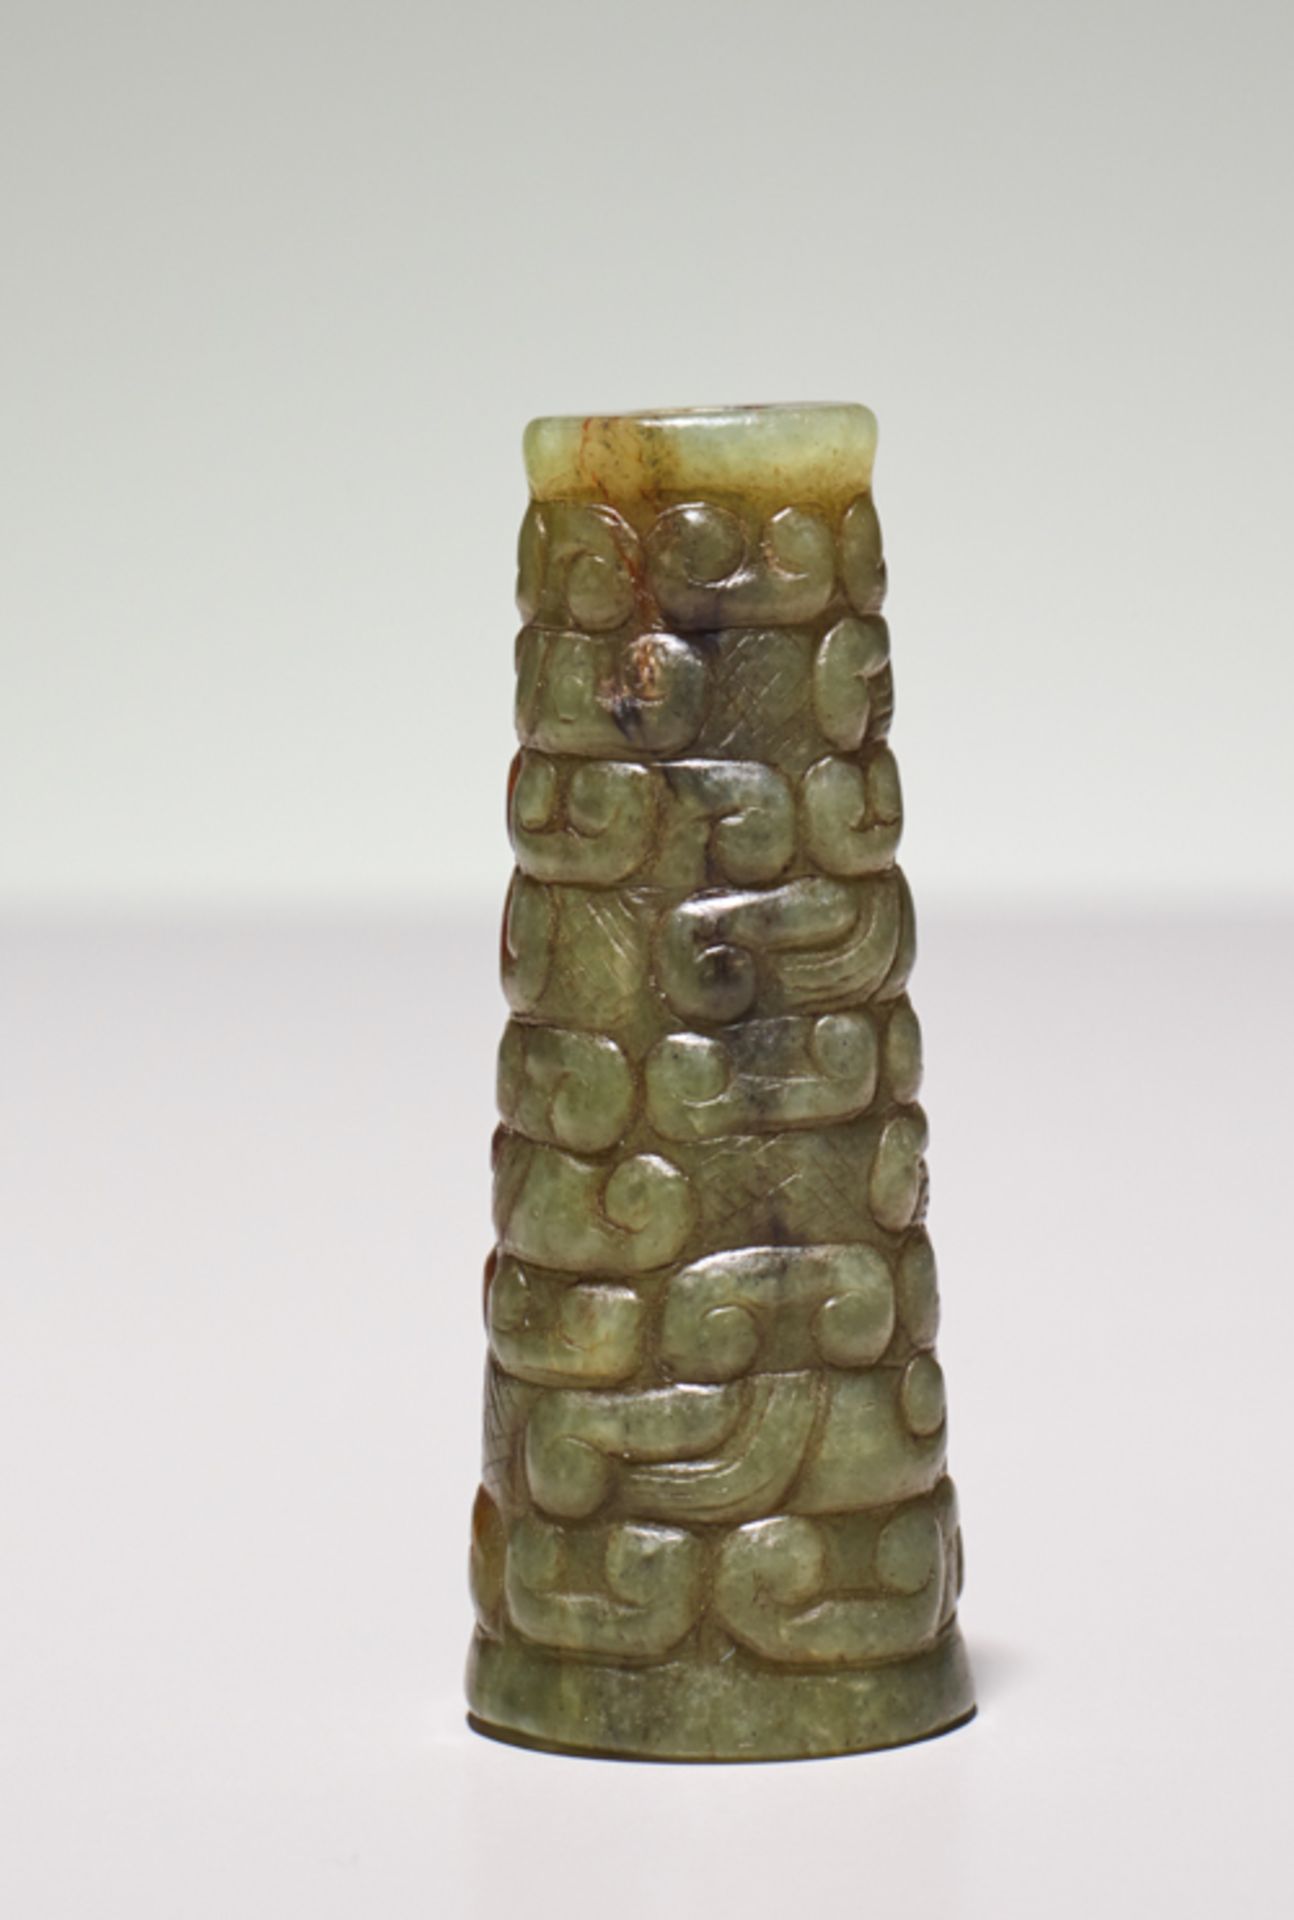 CONICAL BEADJade. China, Eastern Zhou, 5th century BCDuring the Eastern Zhou period, beads like this - Image 4 of 6